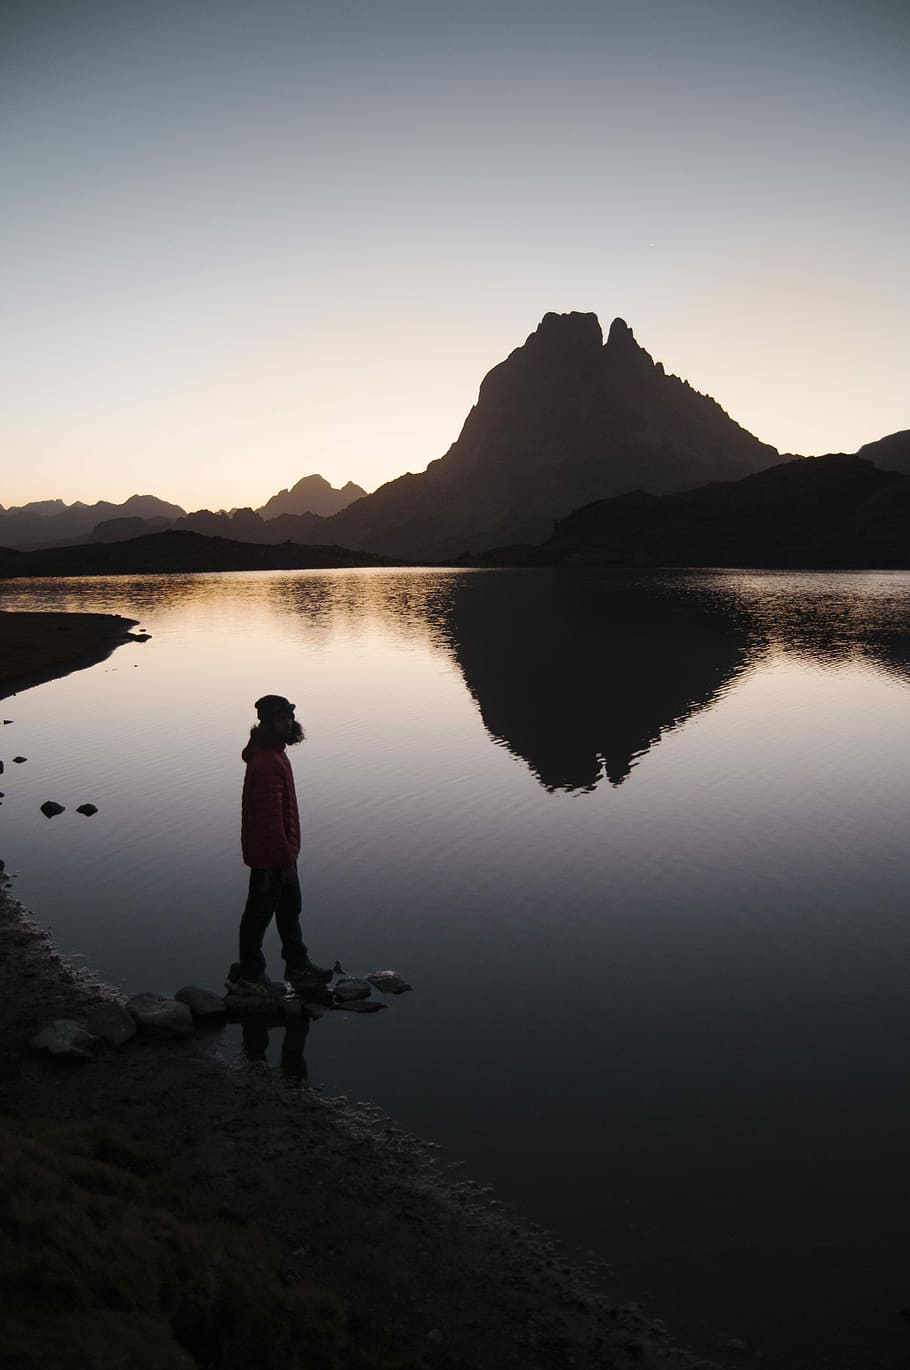 silhouette of person standing beside body of water near mountain during golden hour, man standing far away from island